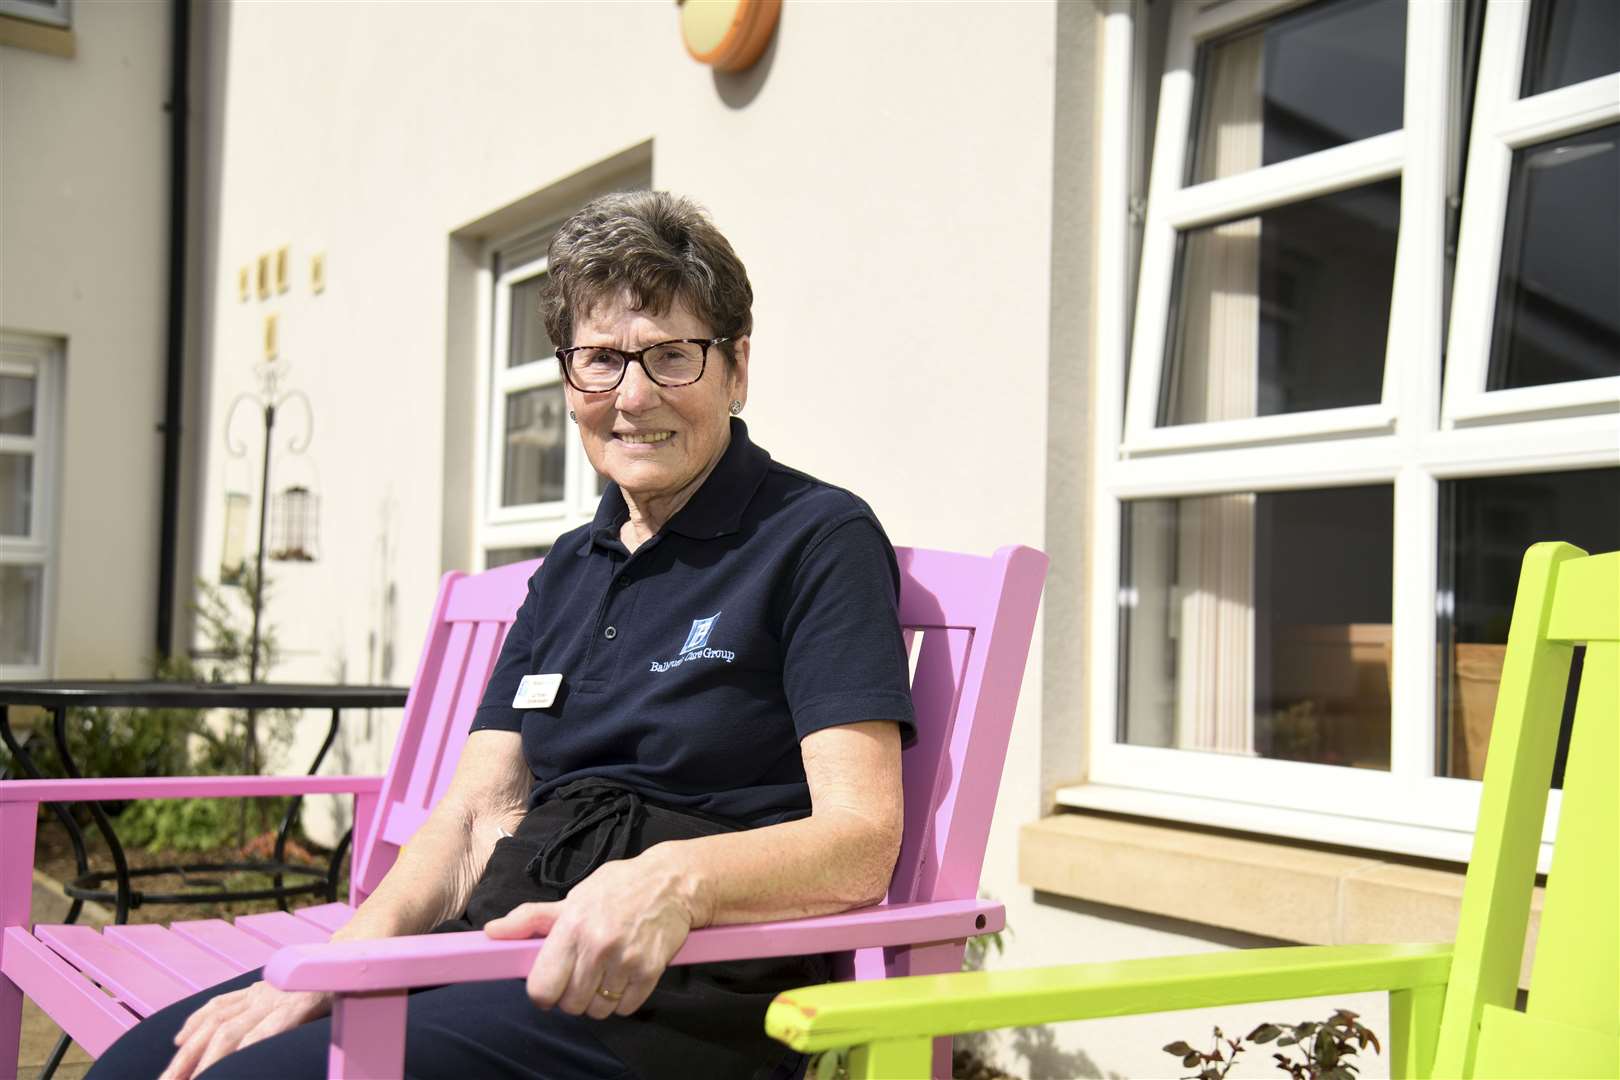 Liz Thomson loves her role as Activities Coordinator for Balhousie Huntly care home. Picture: Becky Saunderson